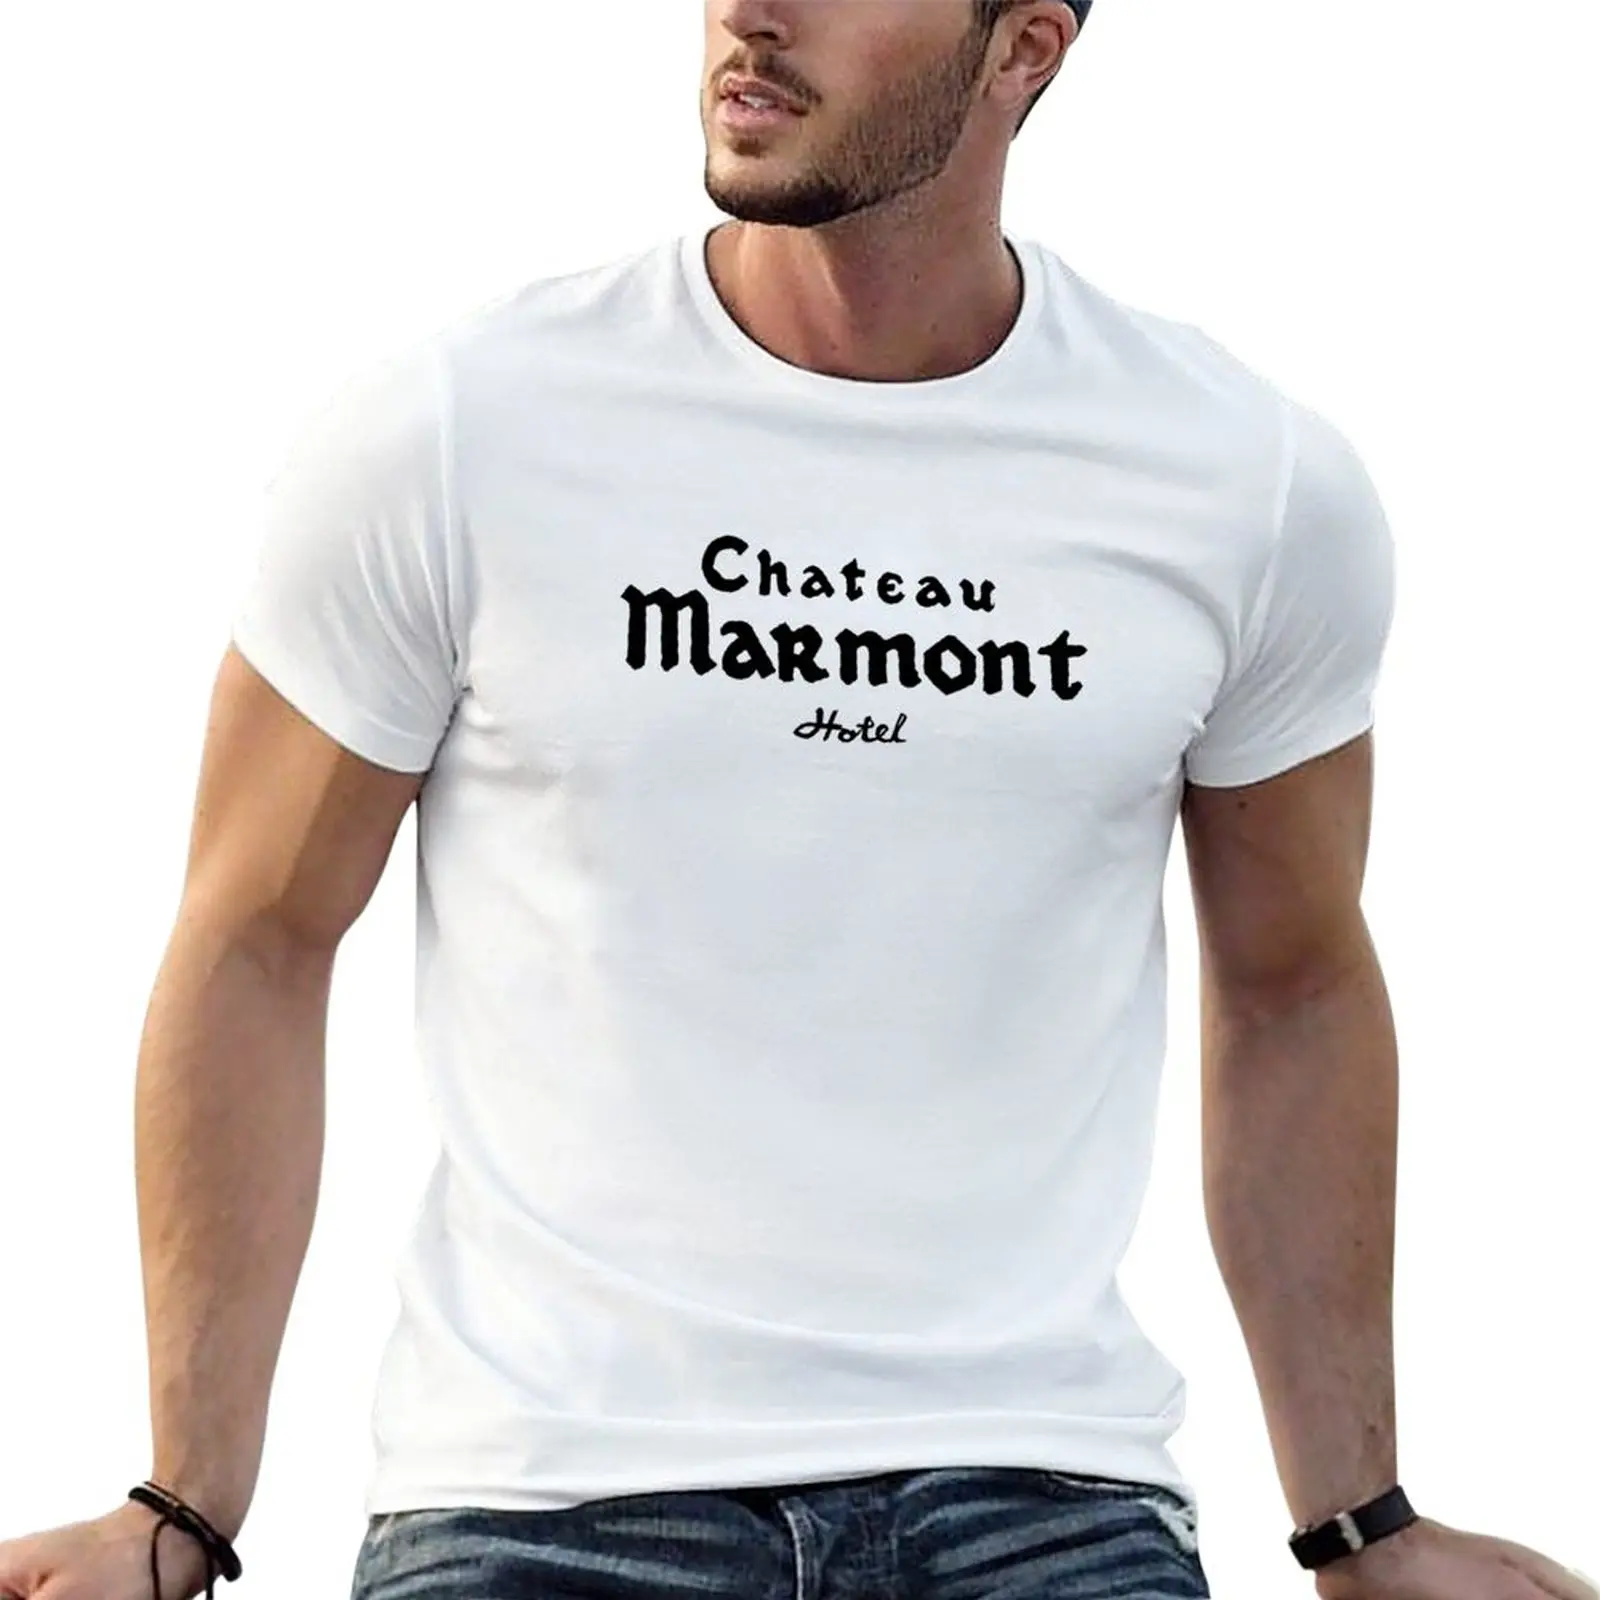 New Chateau Marmont T-Shirt boys animal print shirt cute tops sweat shirts cute clothes T-shirts for men cotton